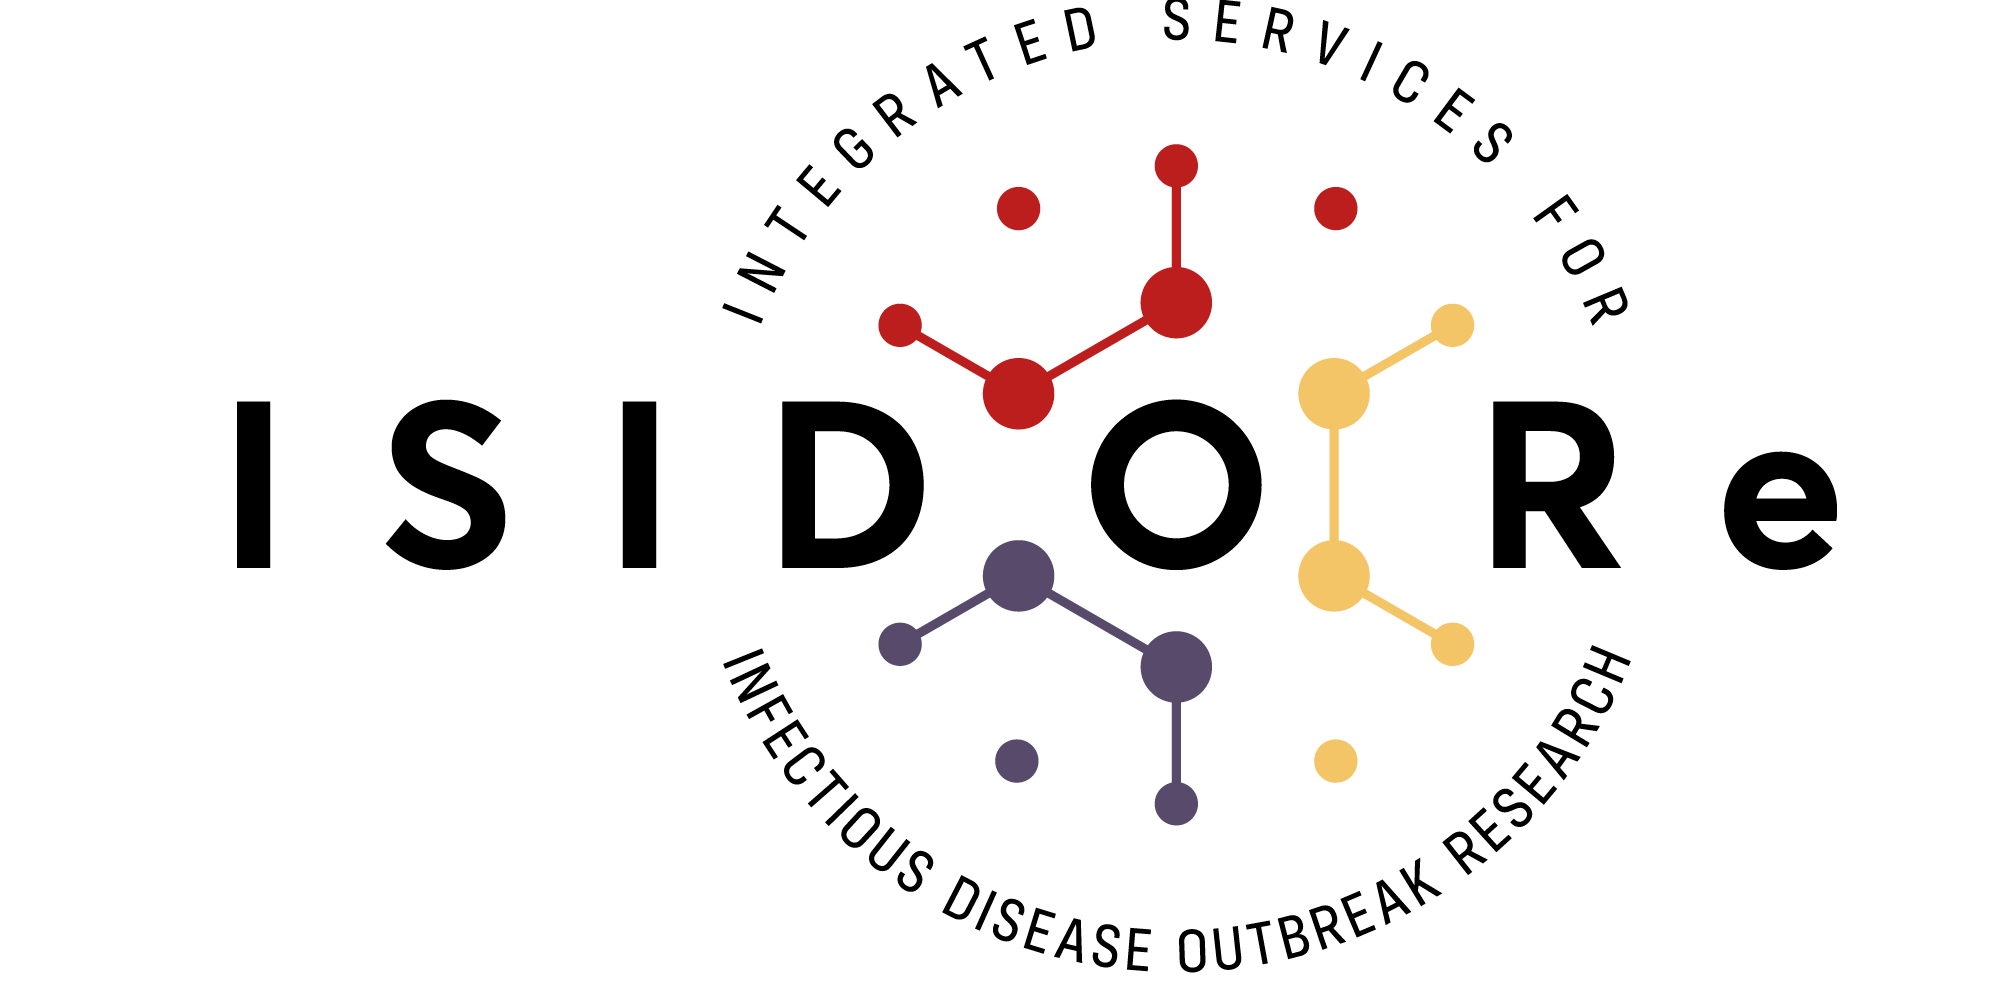 ISIDORe offers services for infectious disease research